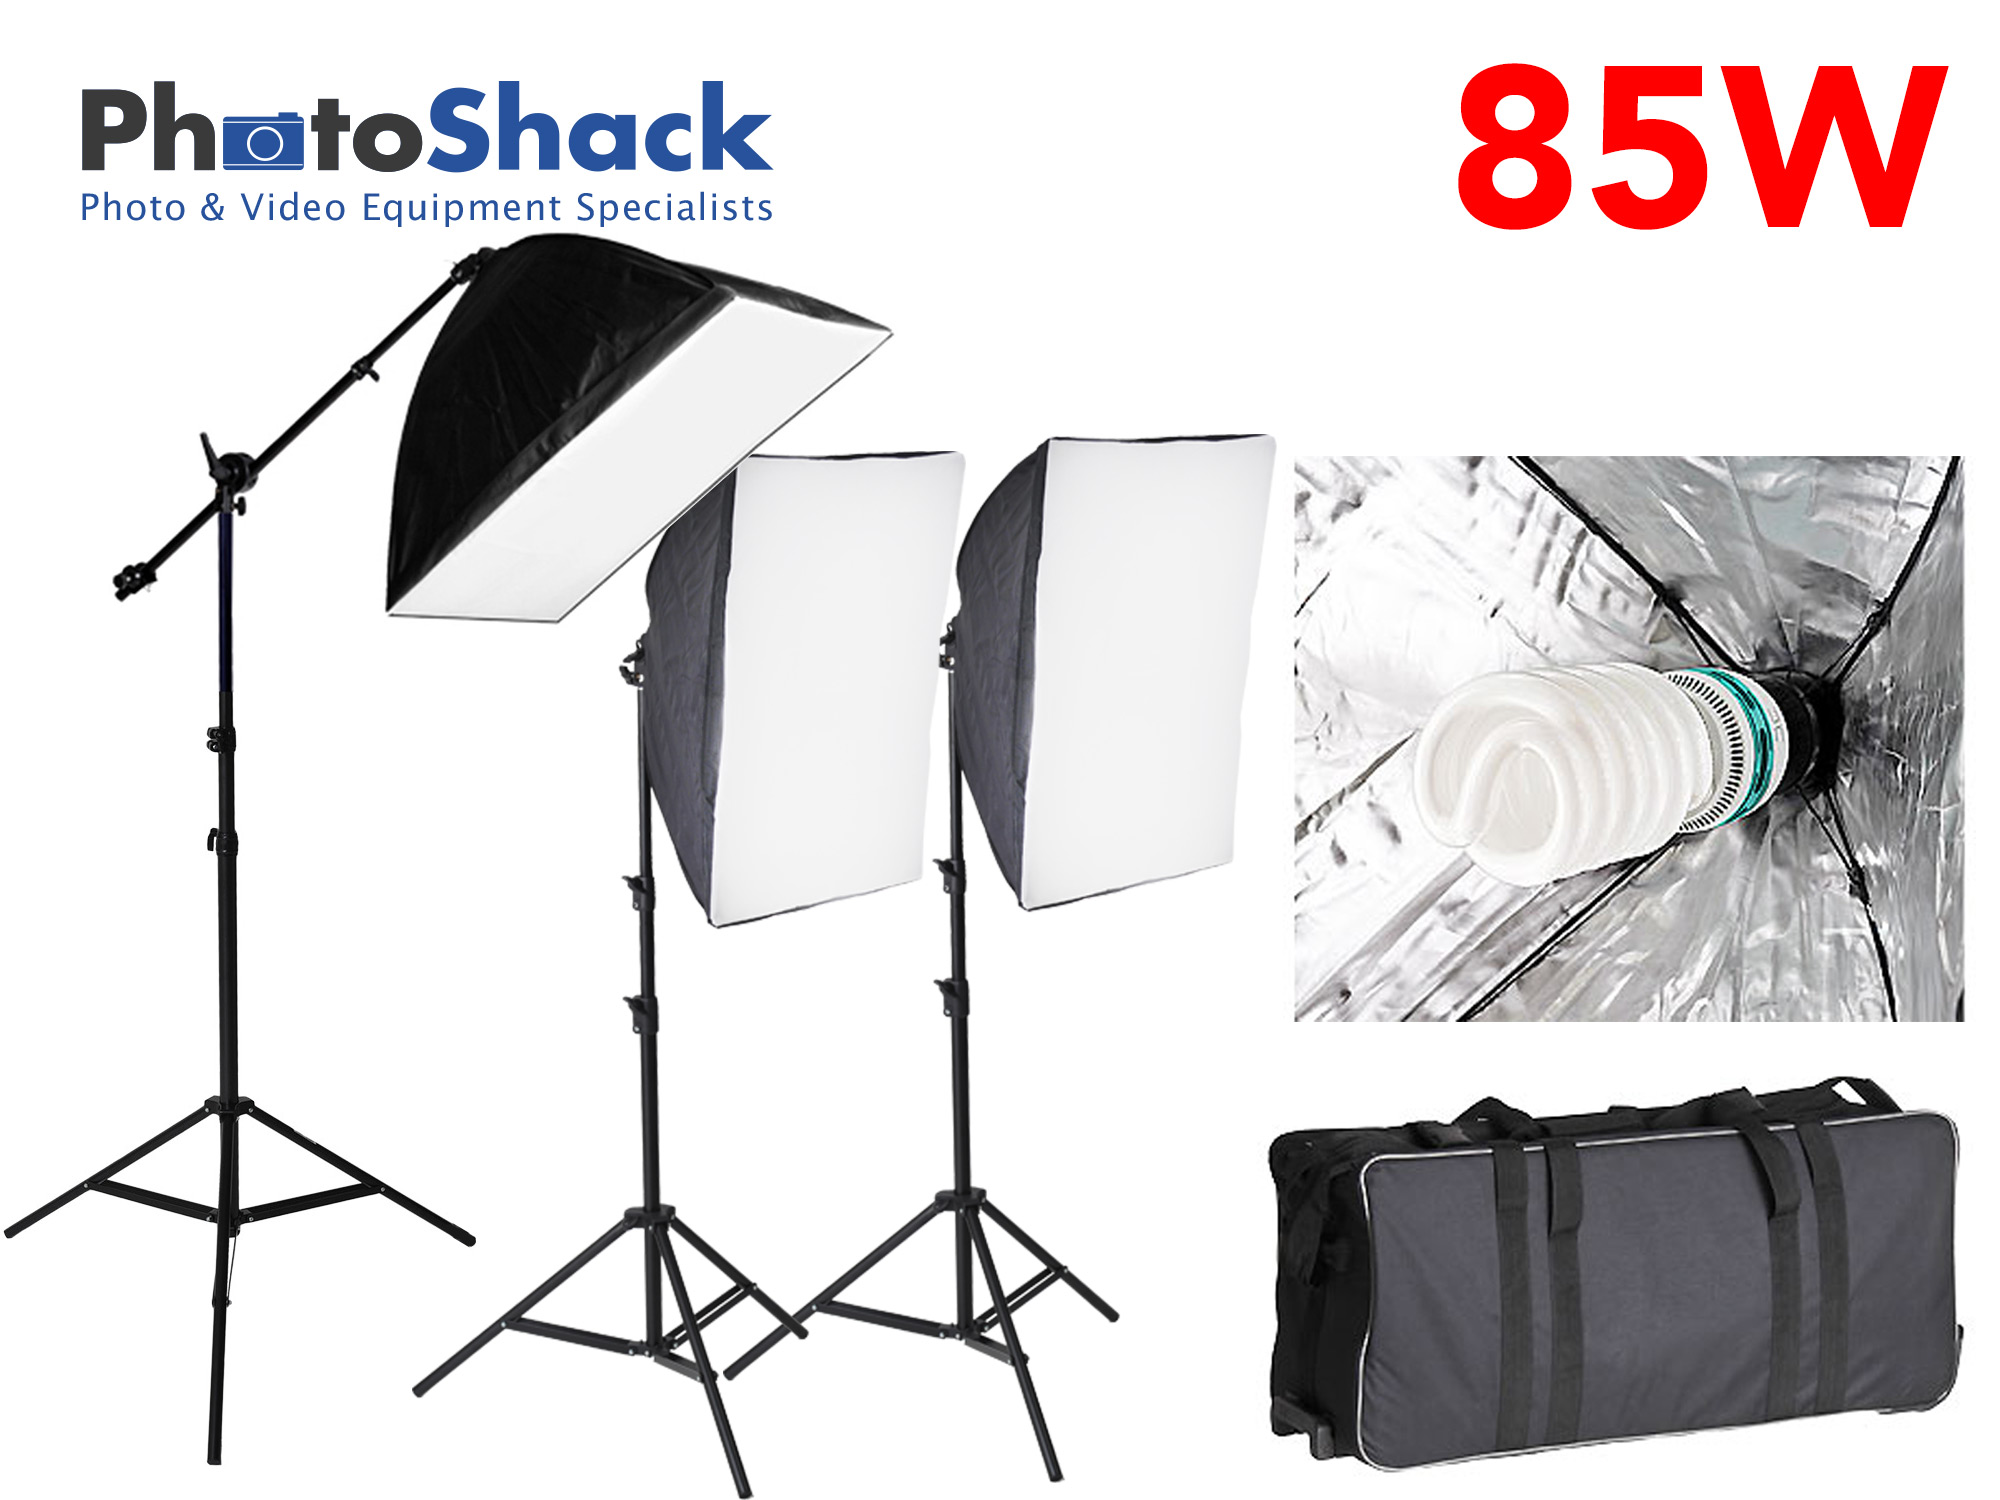 Continuous Lighting Set with 3 85W Lights + Softboxes + Boom Stand & Bulbs 